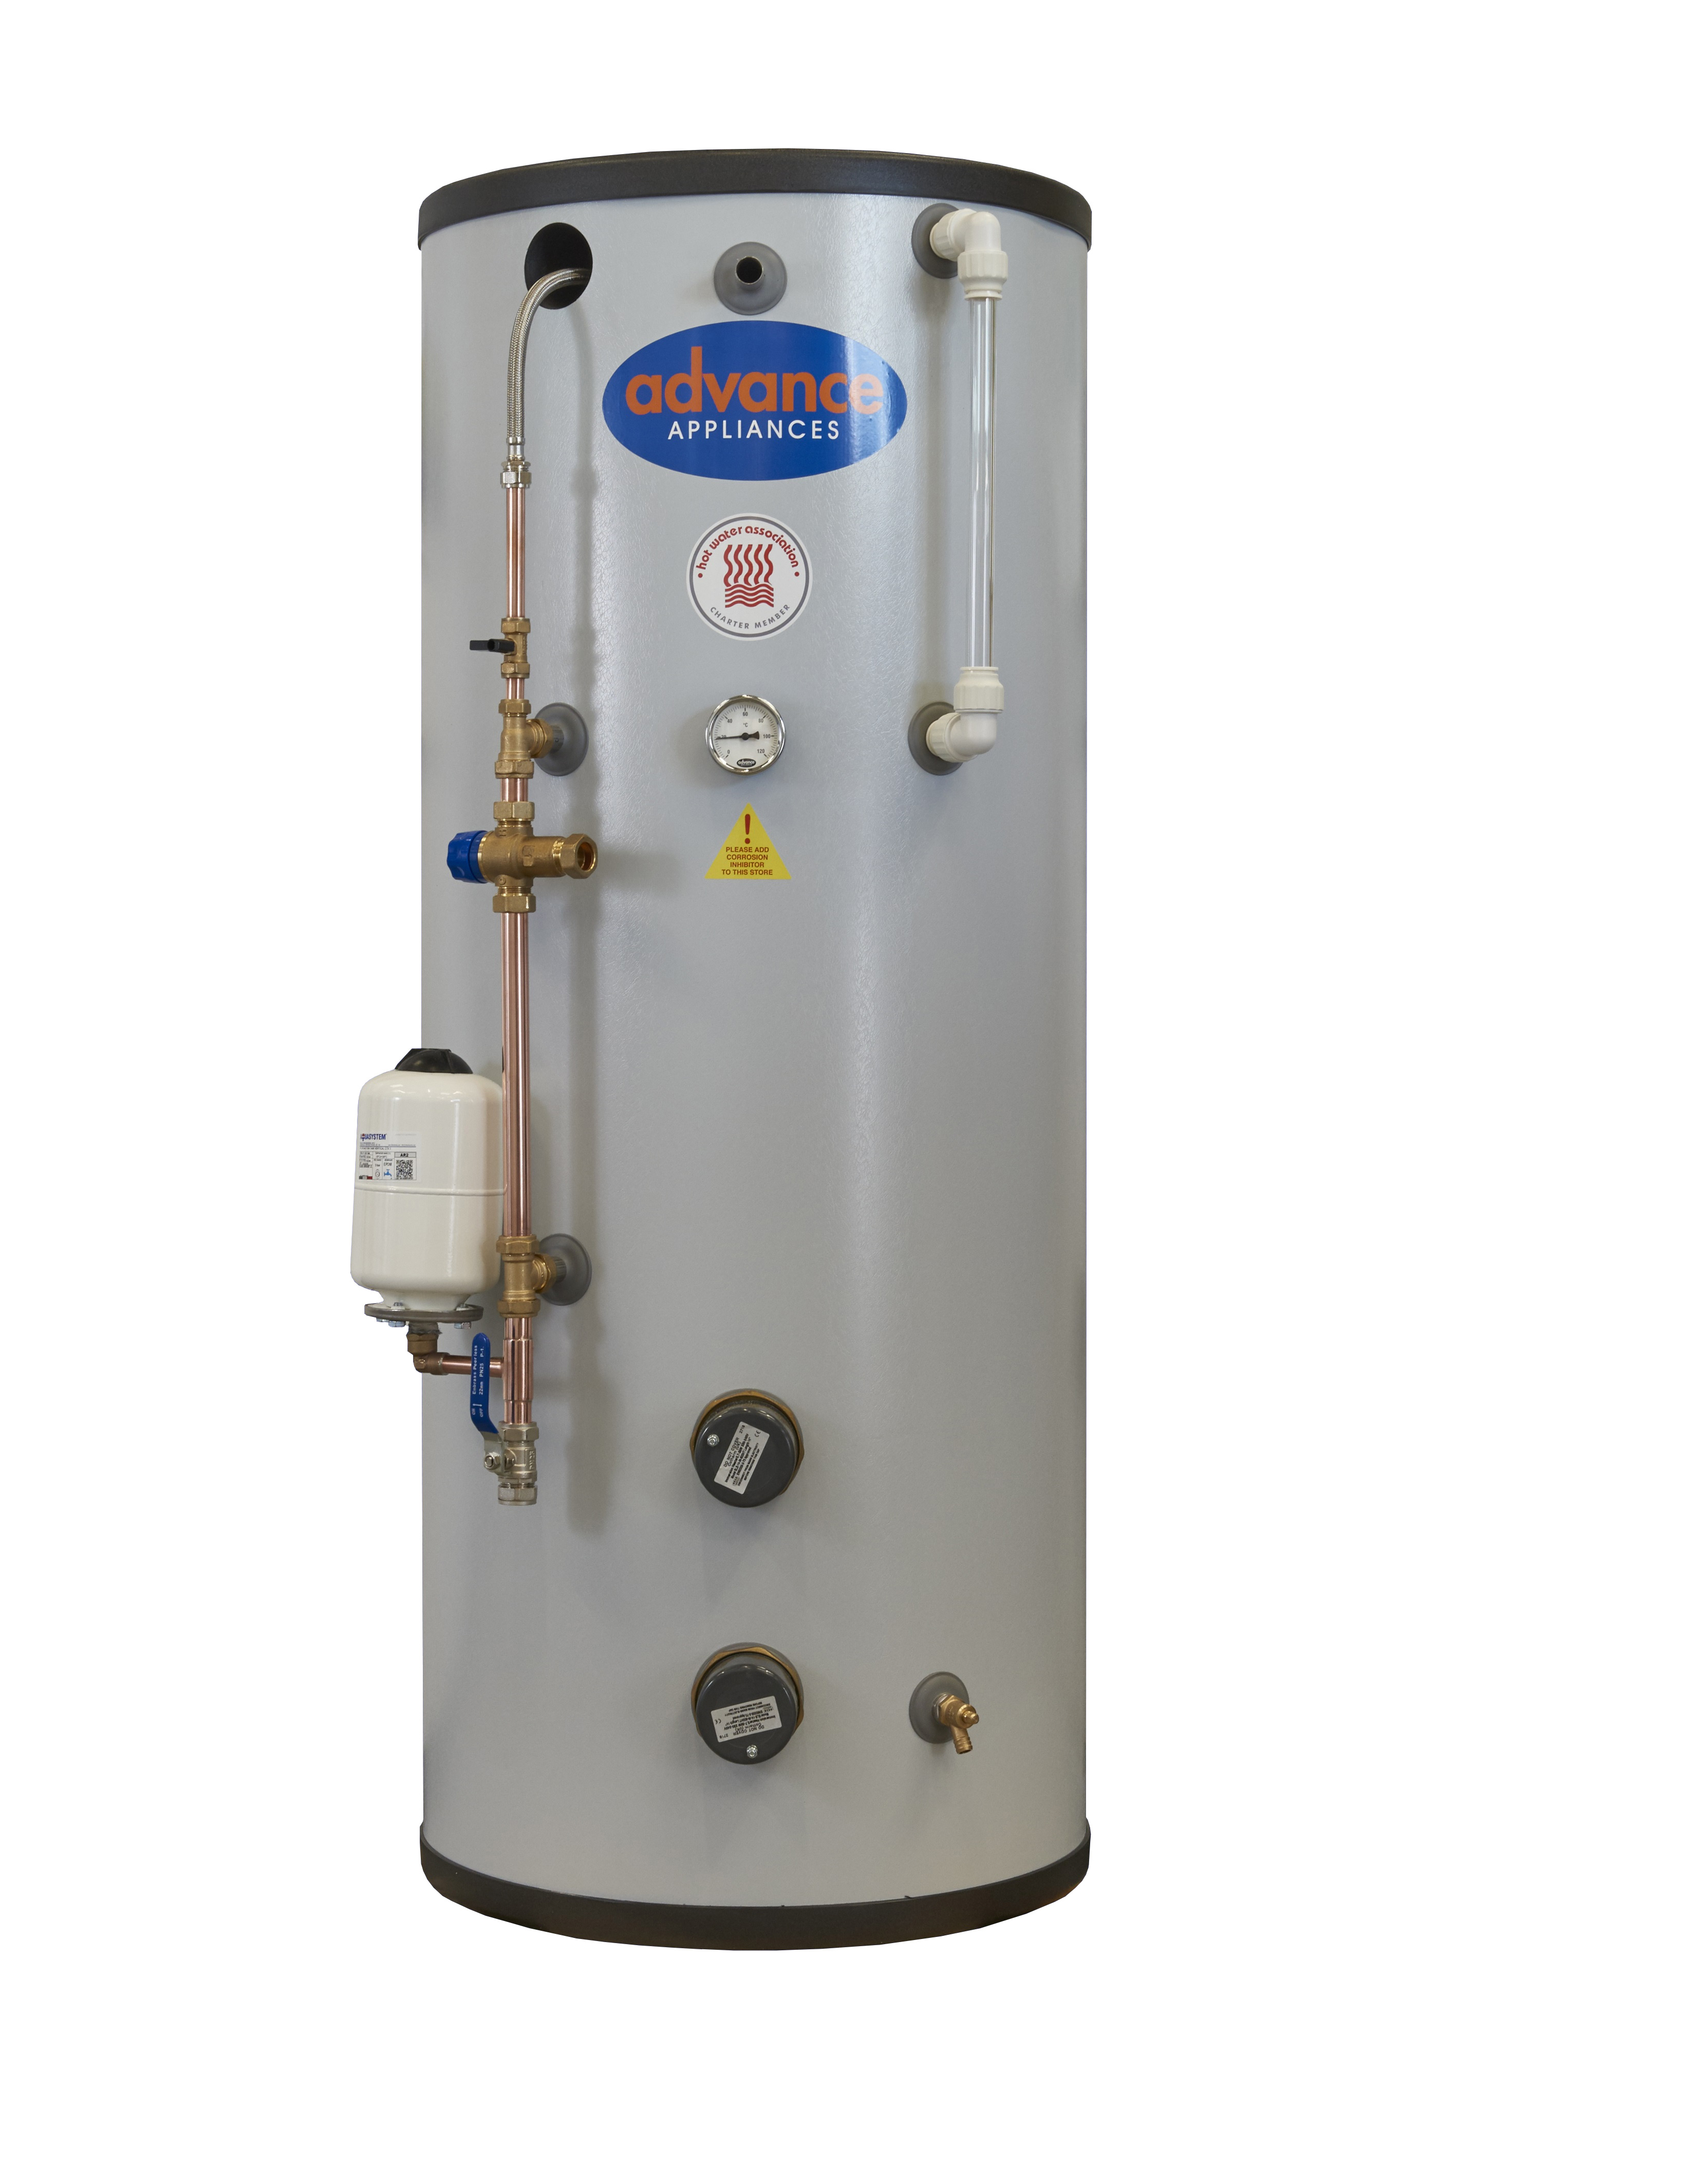 ELECTRIC THERMAL STORE - HOT WATER ONLY